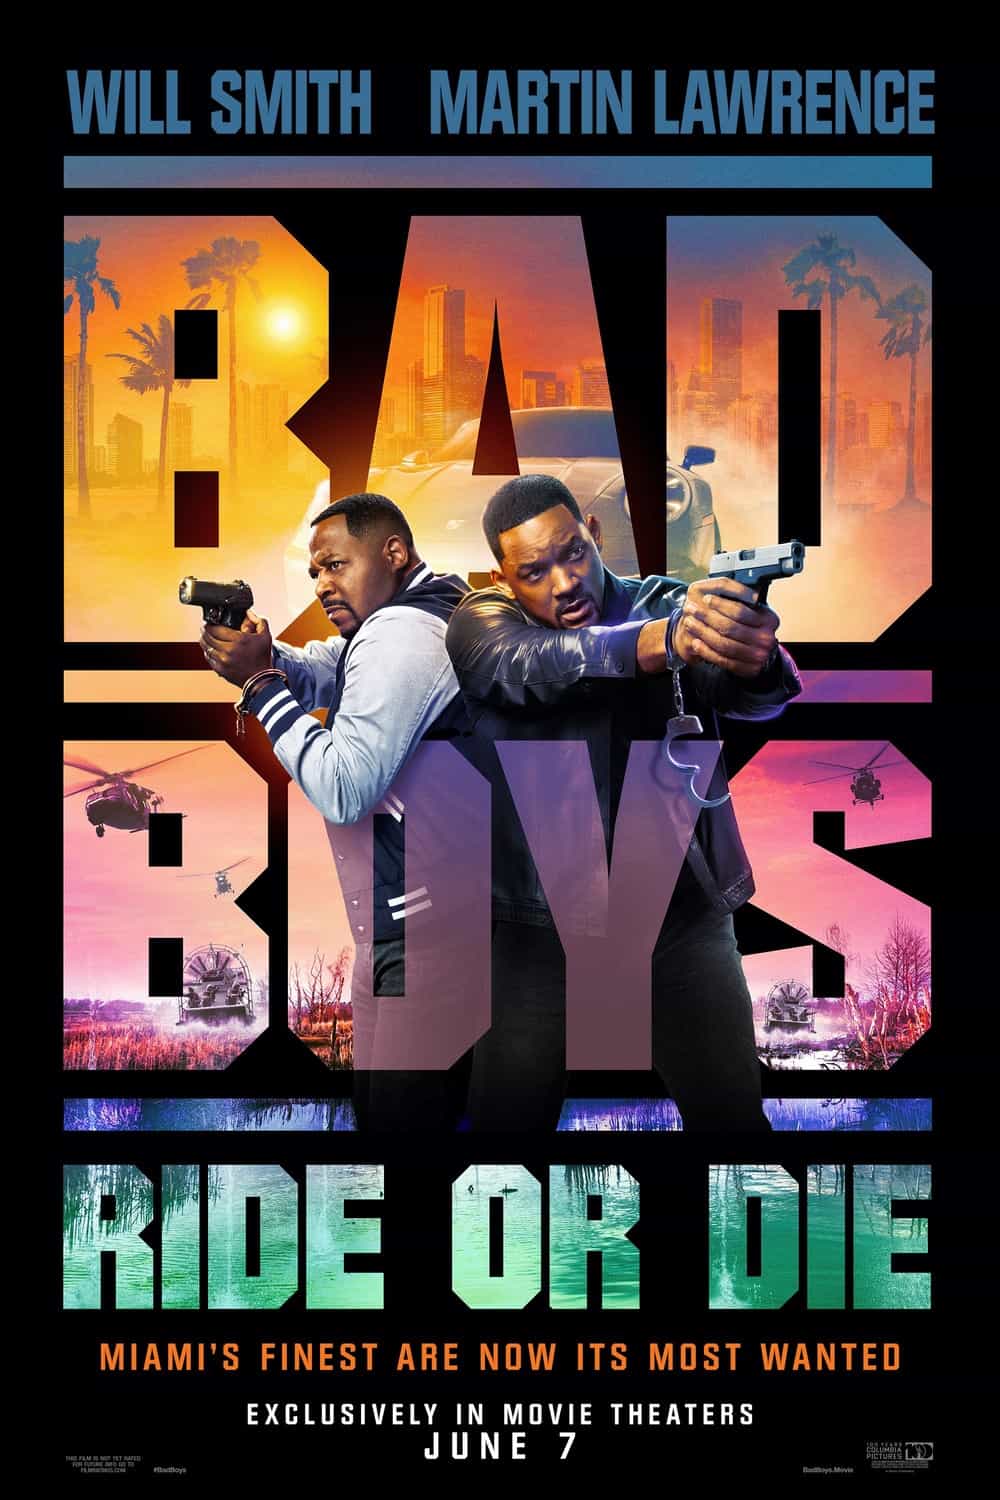 Bad Boys: Ride or Die has been given a 15 age rating in the UK for strong bloody violence, language, sex references